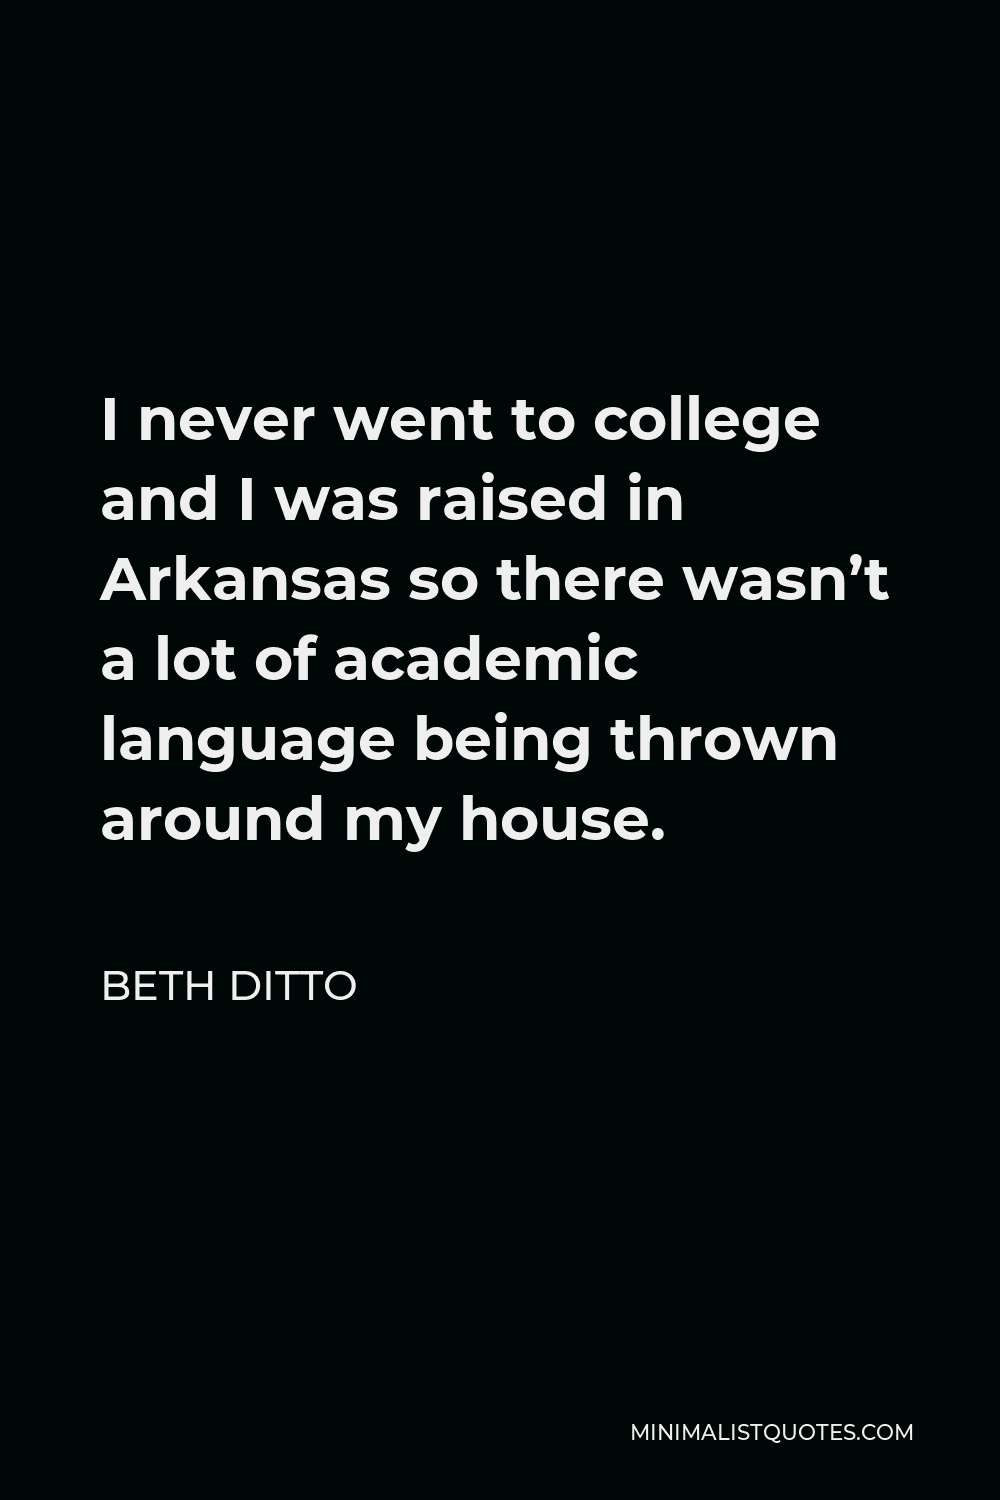 Beth Ditto Quote - I never went to college and I was raised in Arkansas so there wasn’t a lot of academic language being thrown around my house.